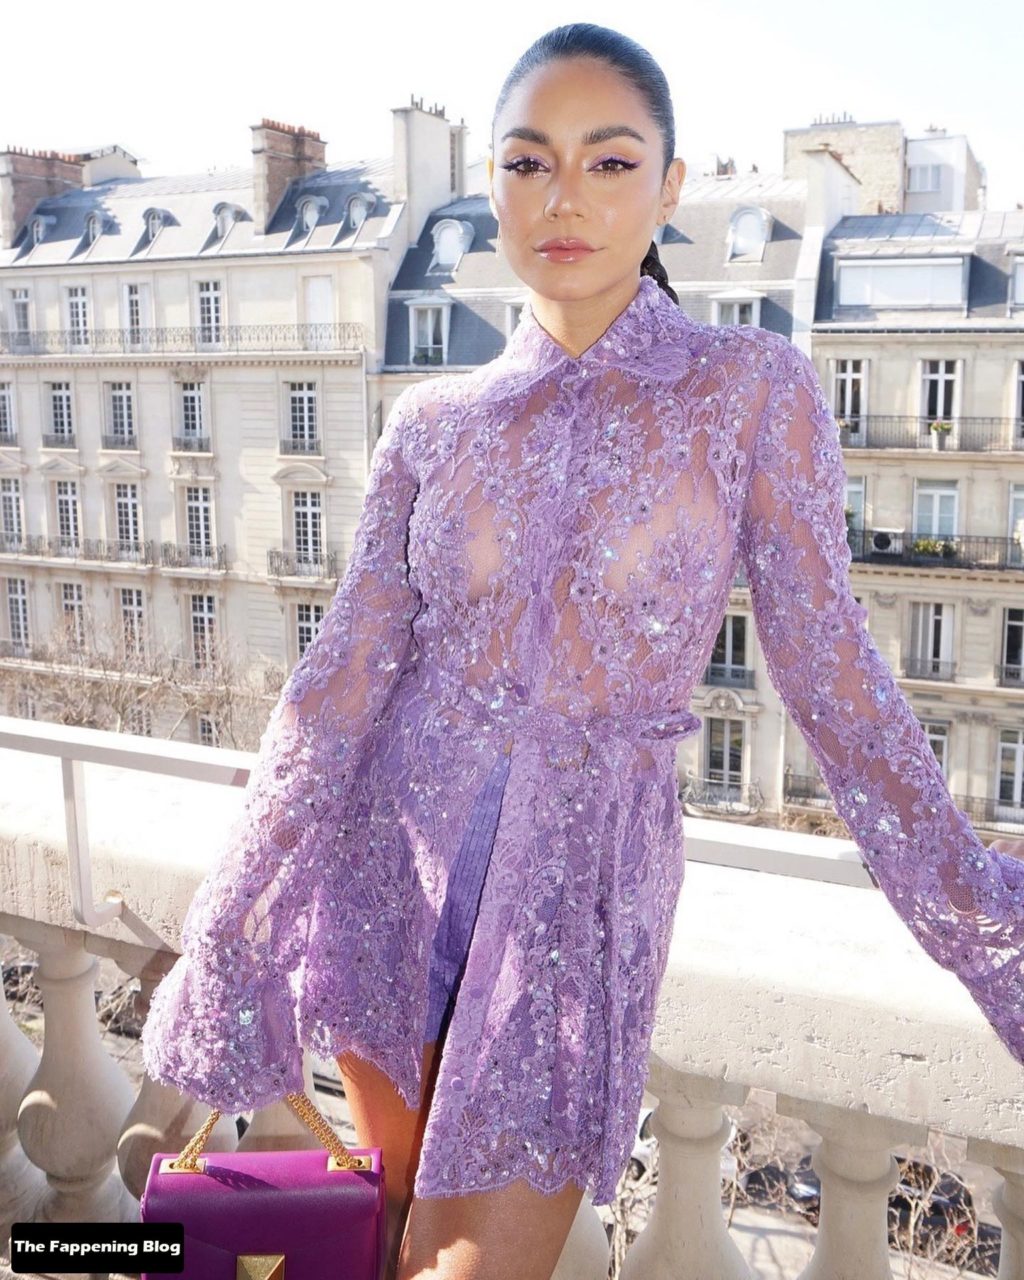 Vanessa Hudgens Sexy Boobs and Legs 2 thefappeningblog.com  1024x1280 - Vanessa Hudgens Looks Hot in a See-Through Dress at the Valentino Womenswear Show (54 Photos)